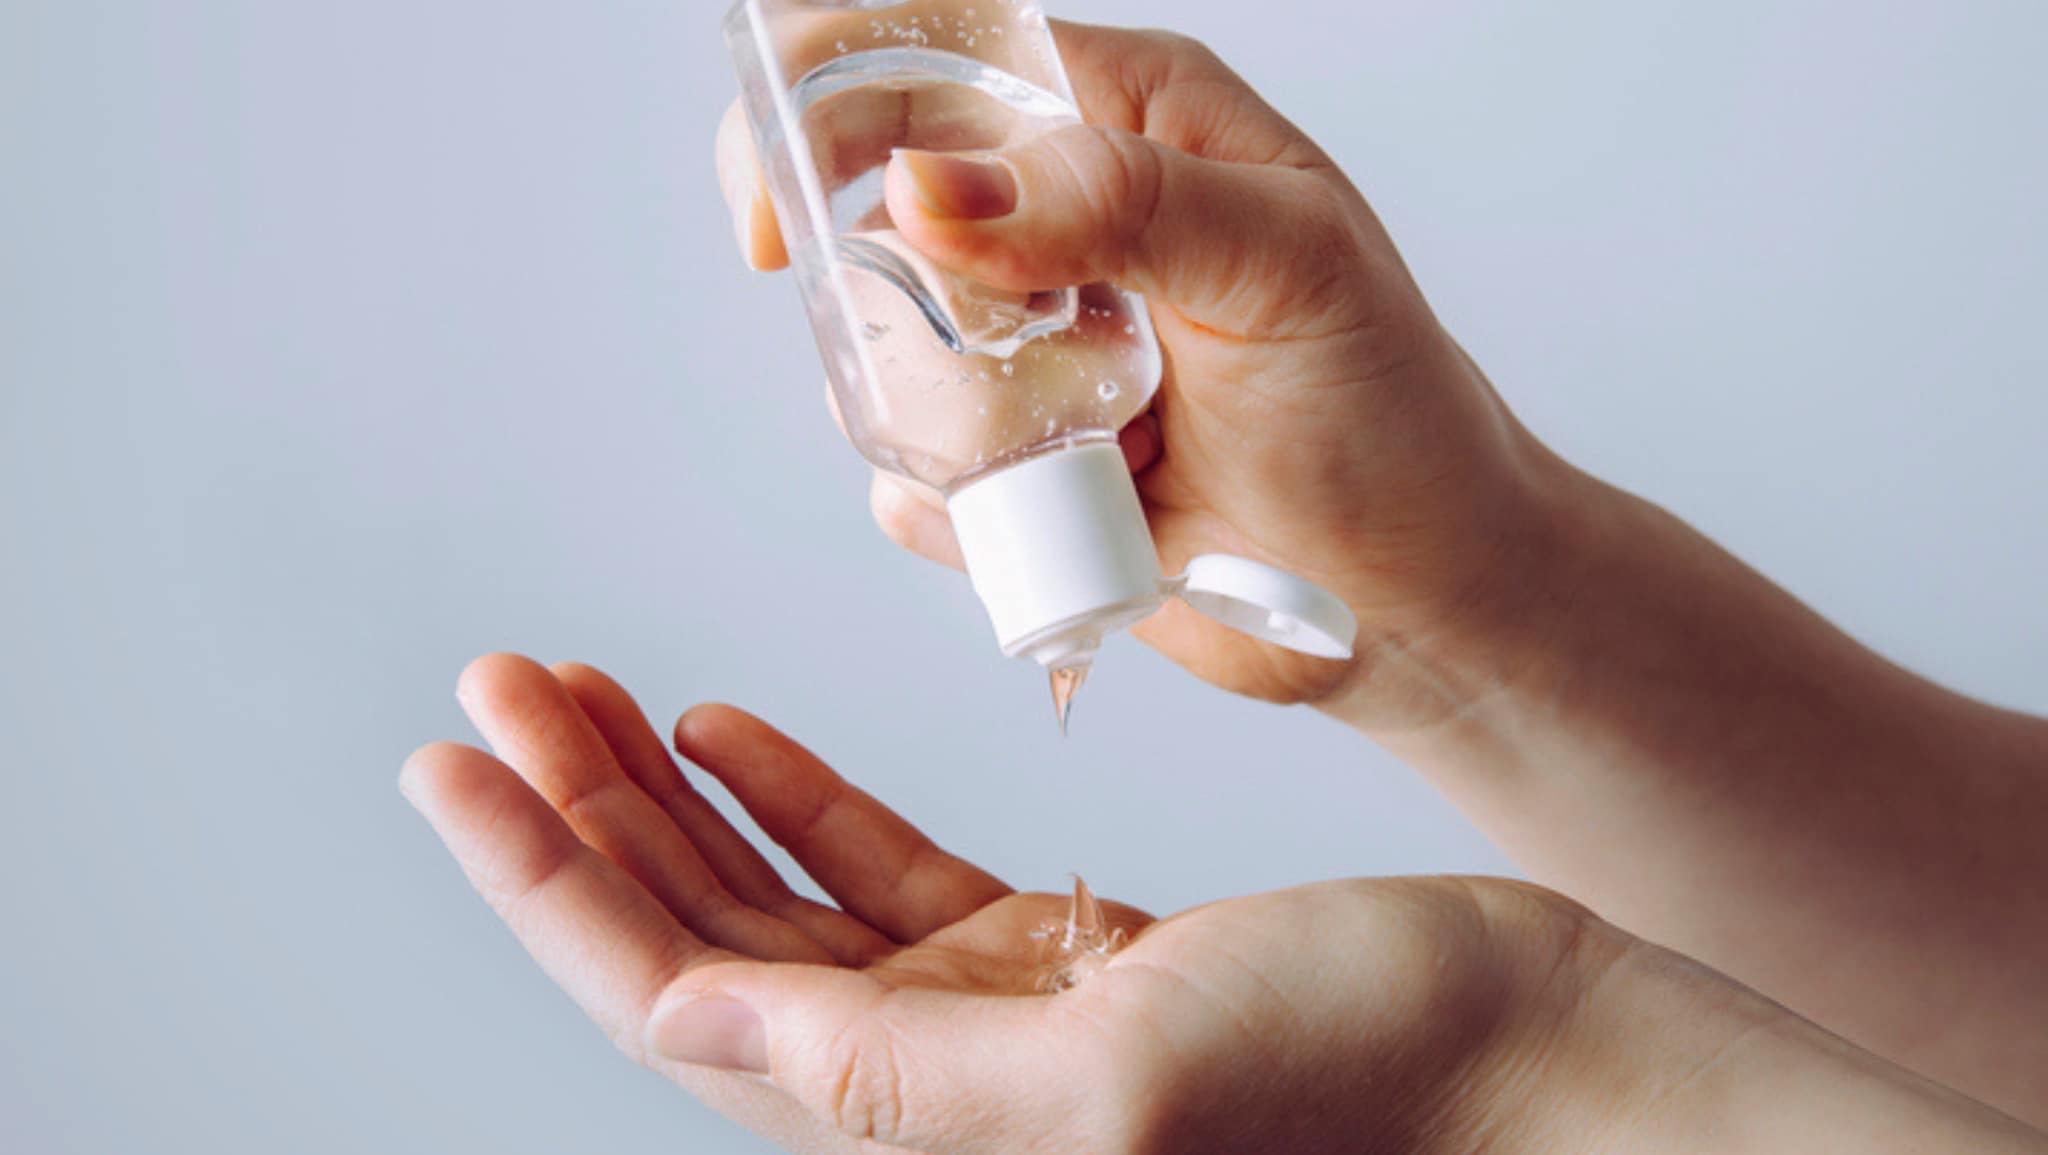 person using hand sanitizer